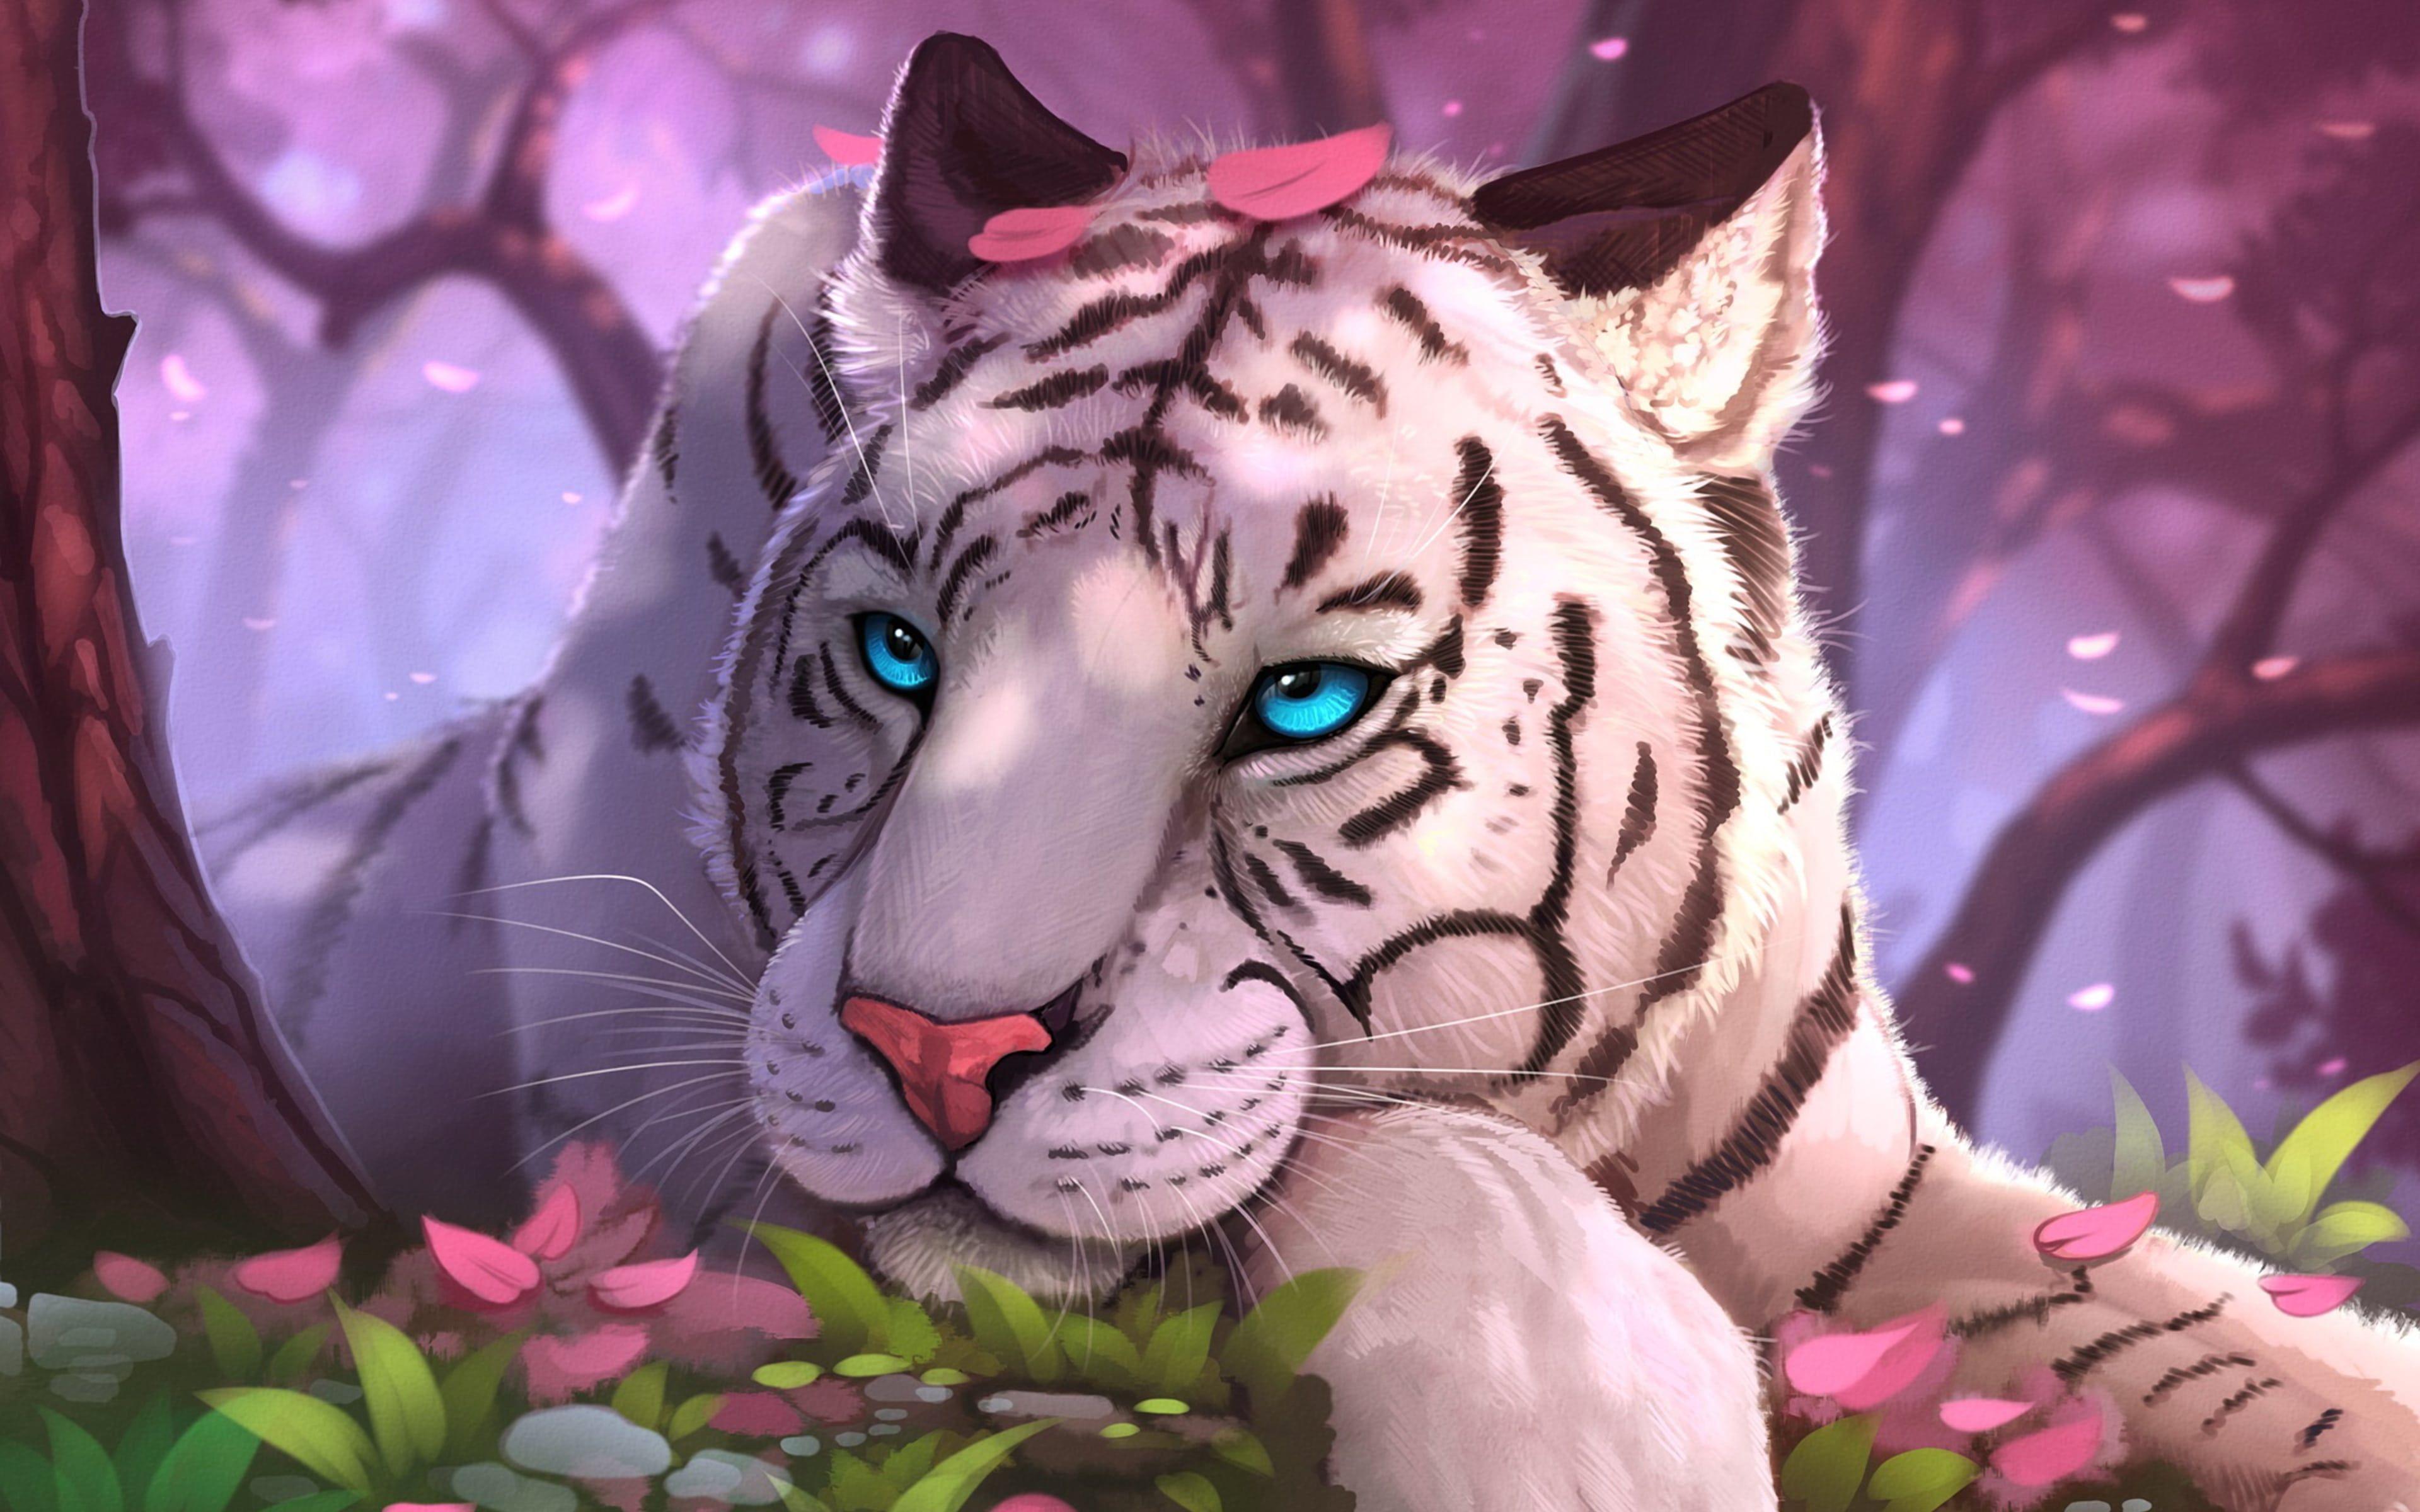 White Tiger Pink Forest Fantasy Art White Tiger Pink Forest Fantasy Art is an HD desktop wallpaper posted in our free. Tiger artwork, Tiger painting, Tiger art